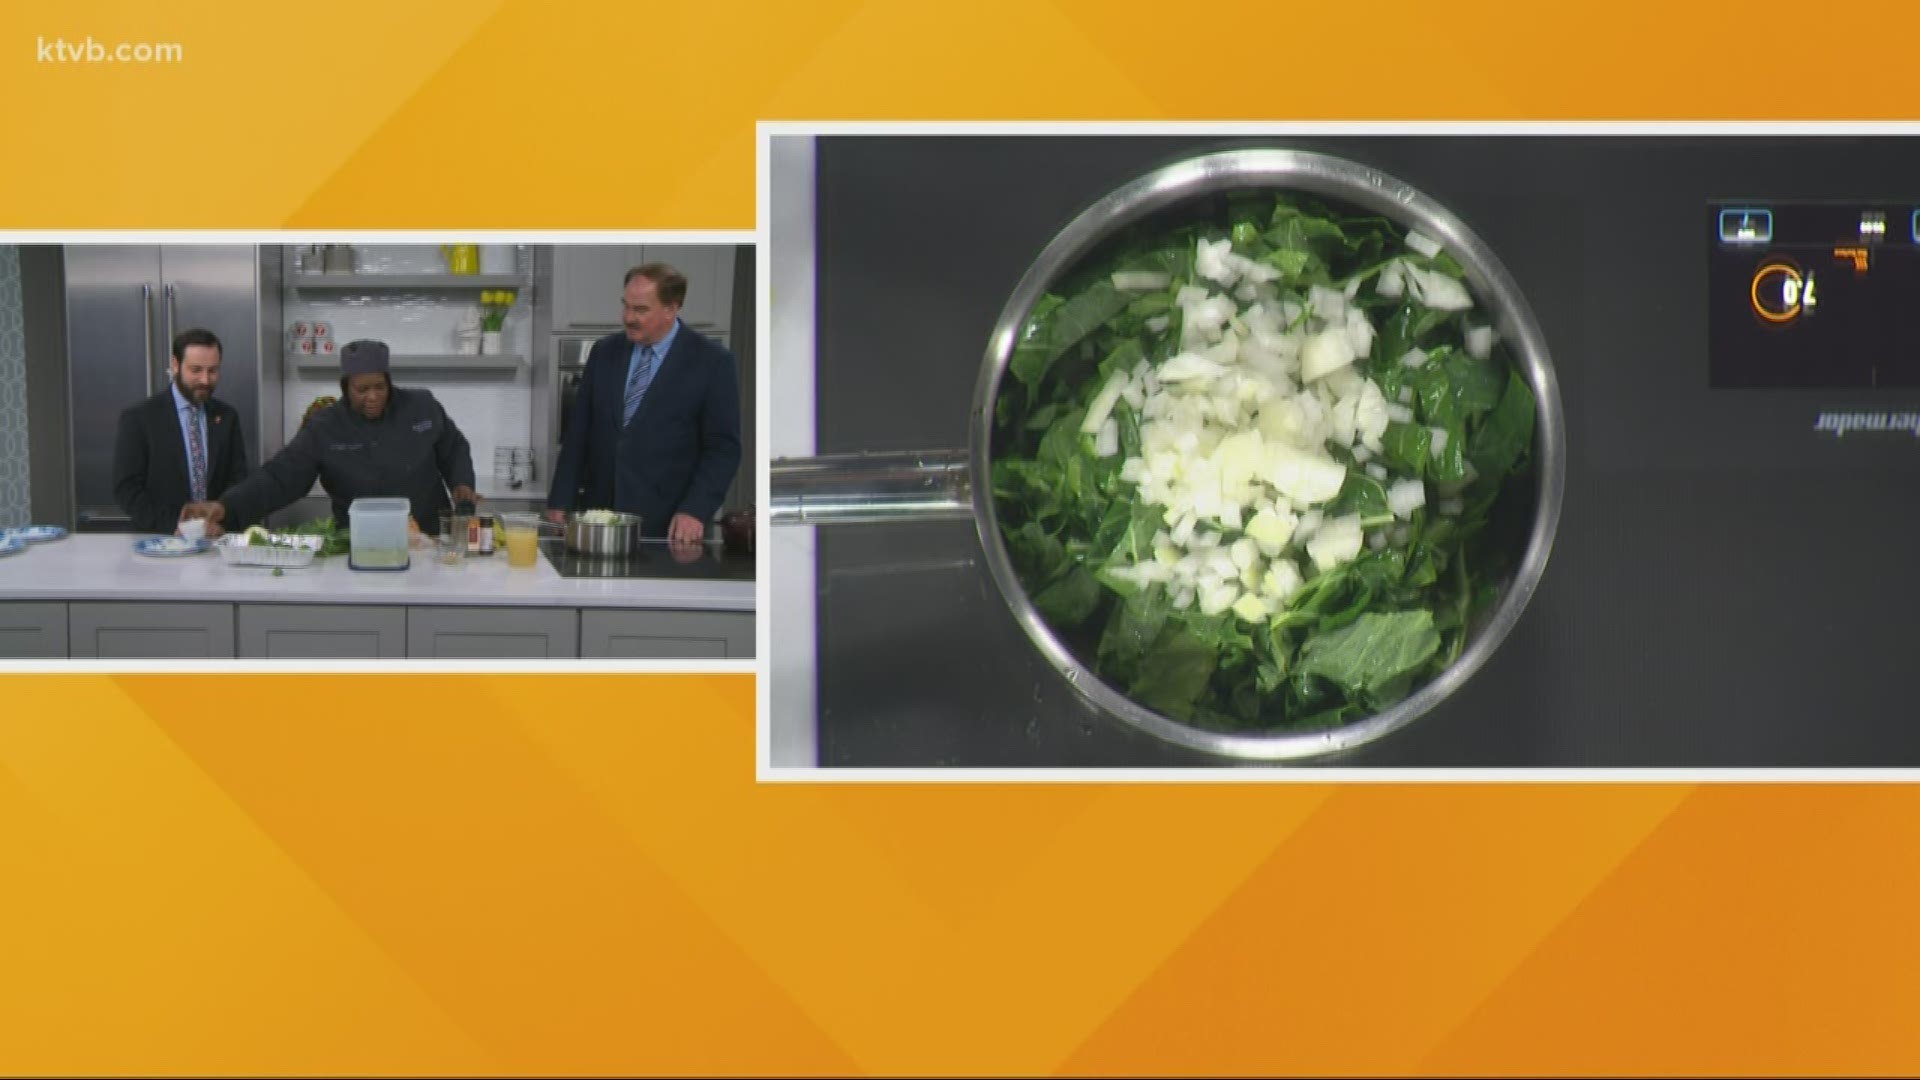 Chef Yvonne Anderson shows how to prepare a healthy vegetable dish.